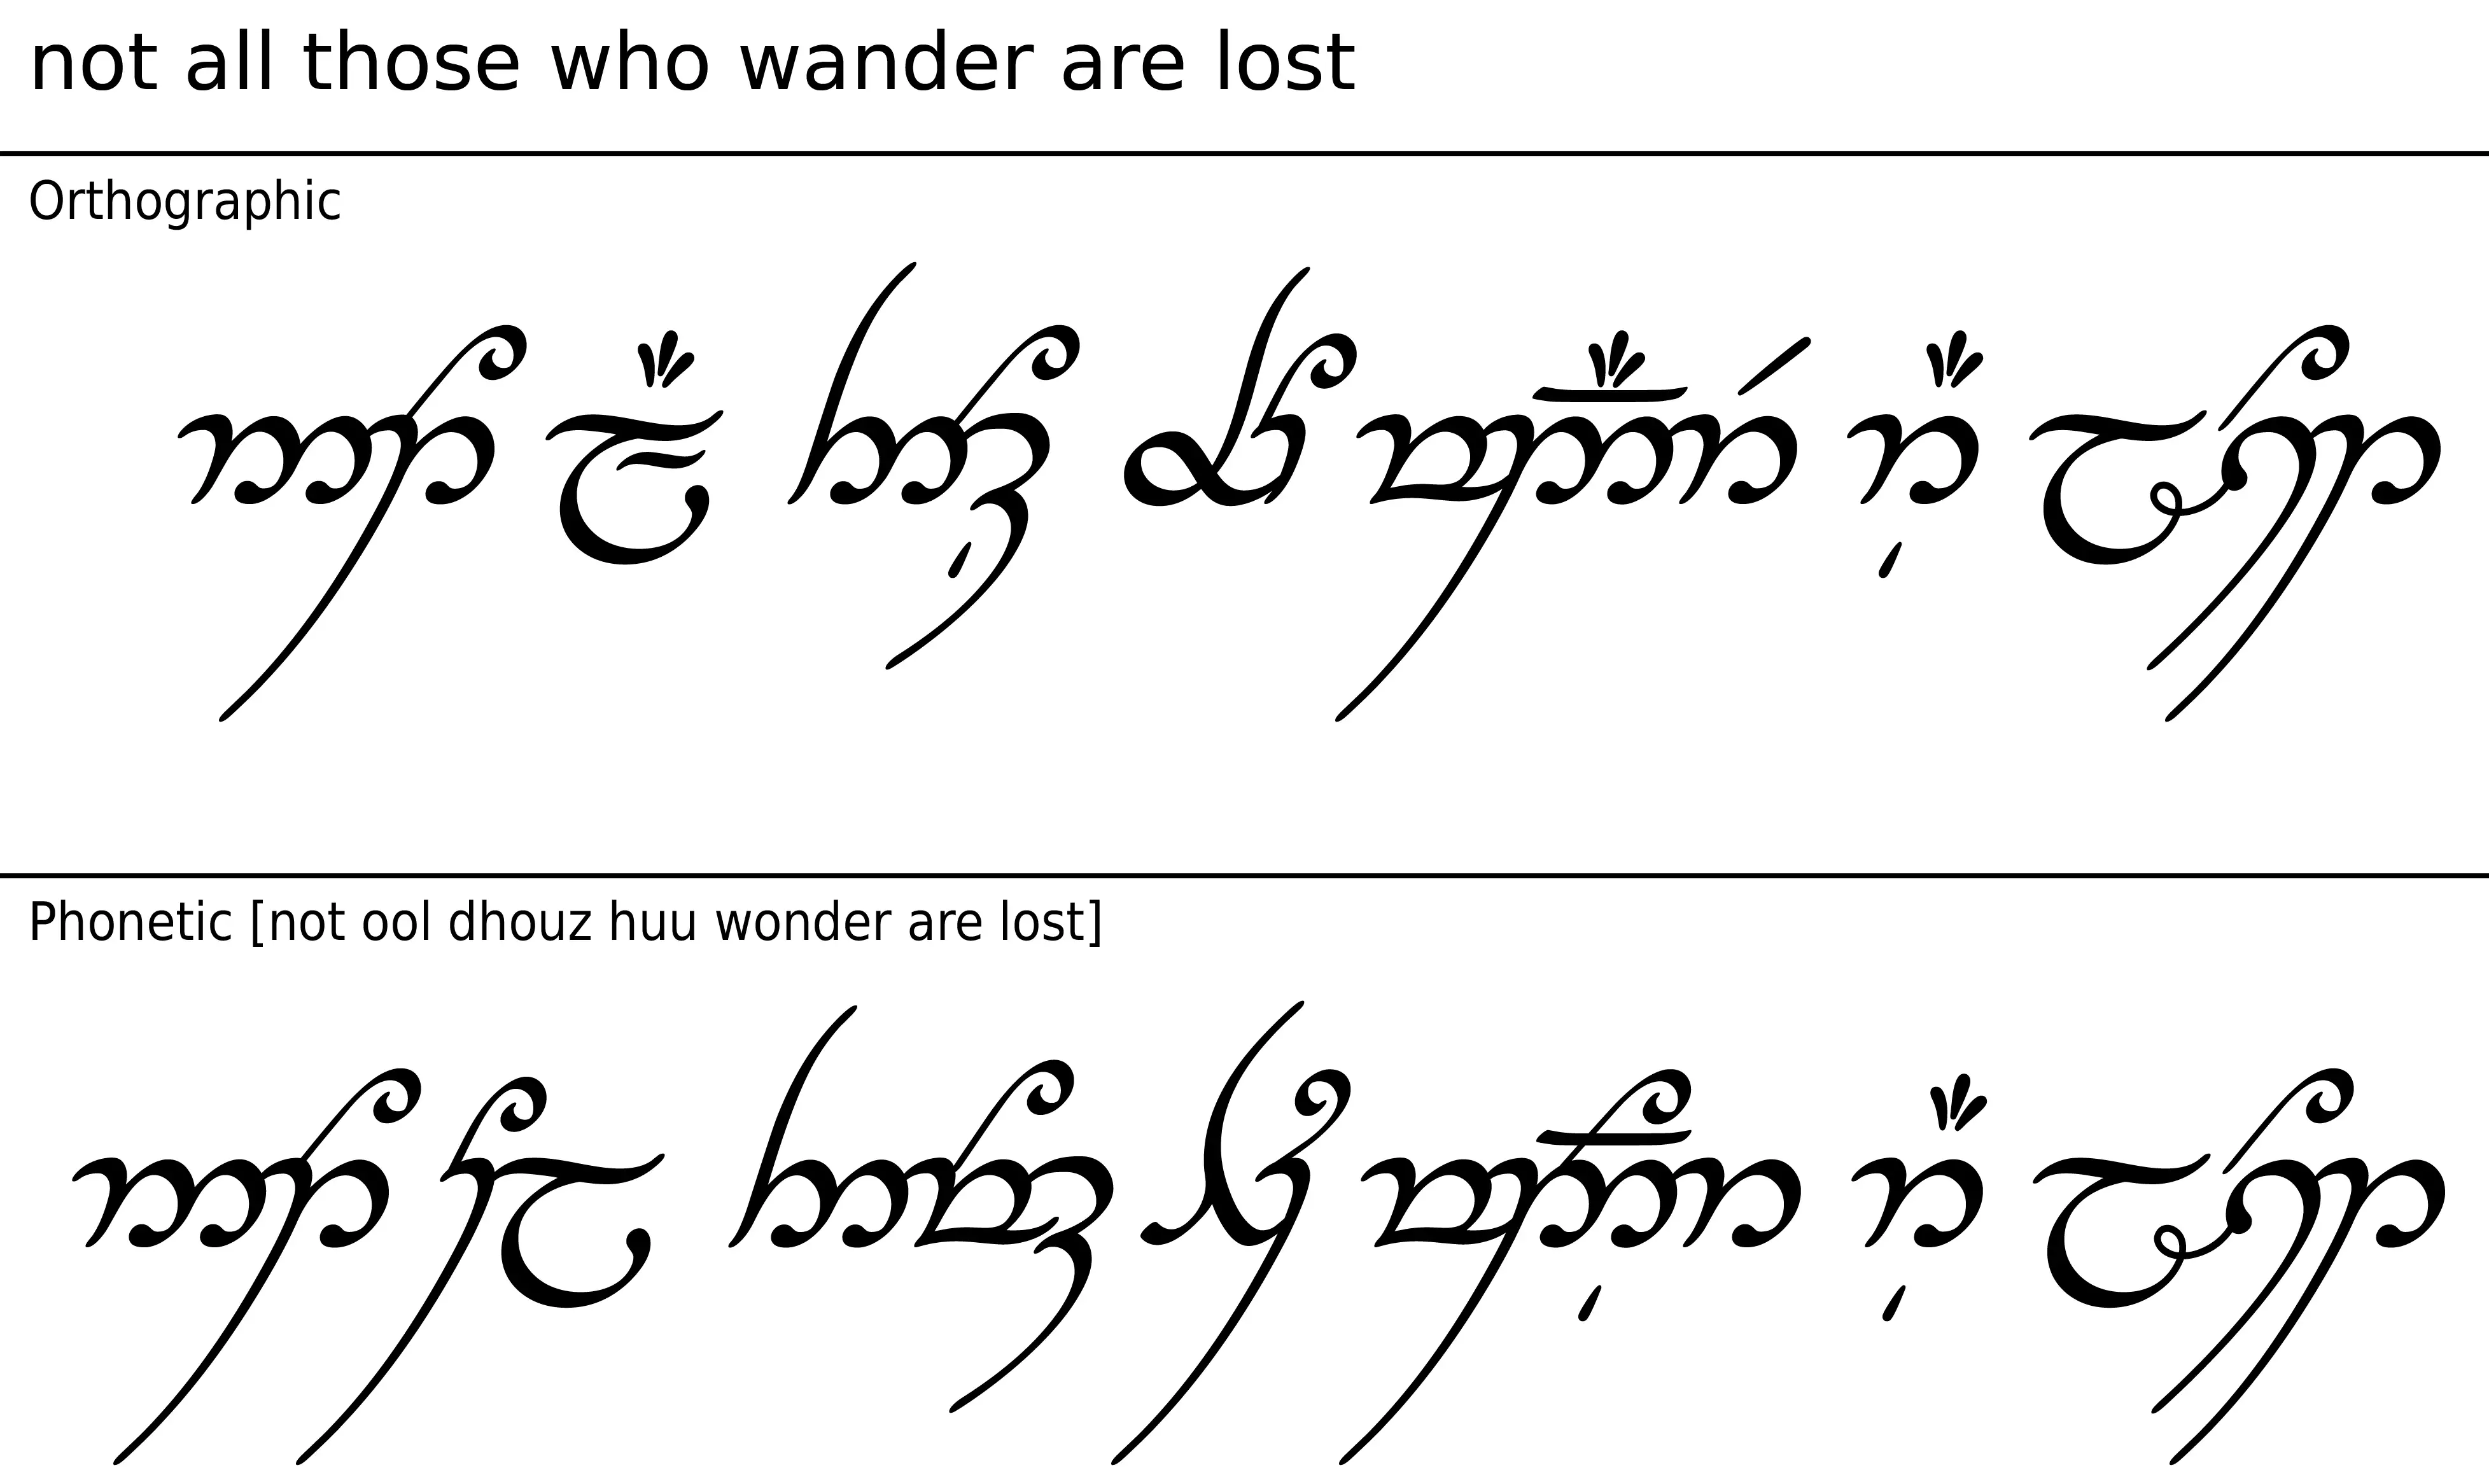 Not, those who wander are lost" FULL analysis in. helpful non helpful....